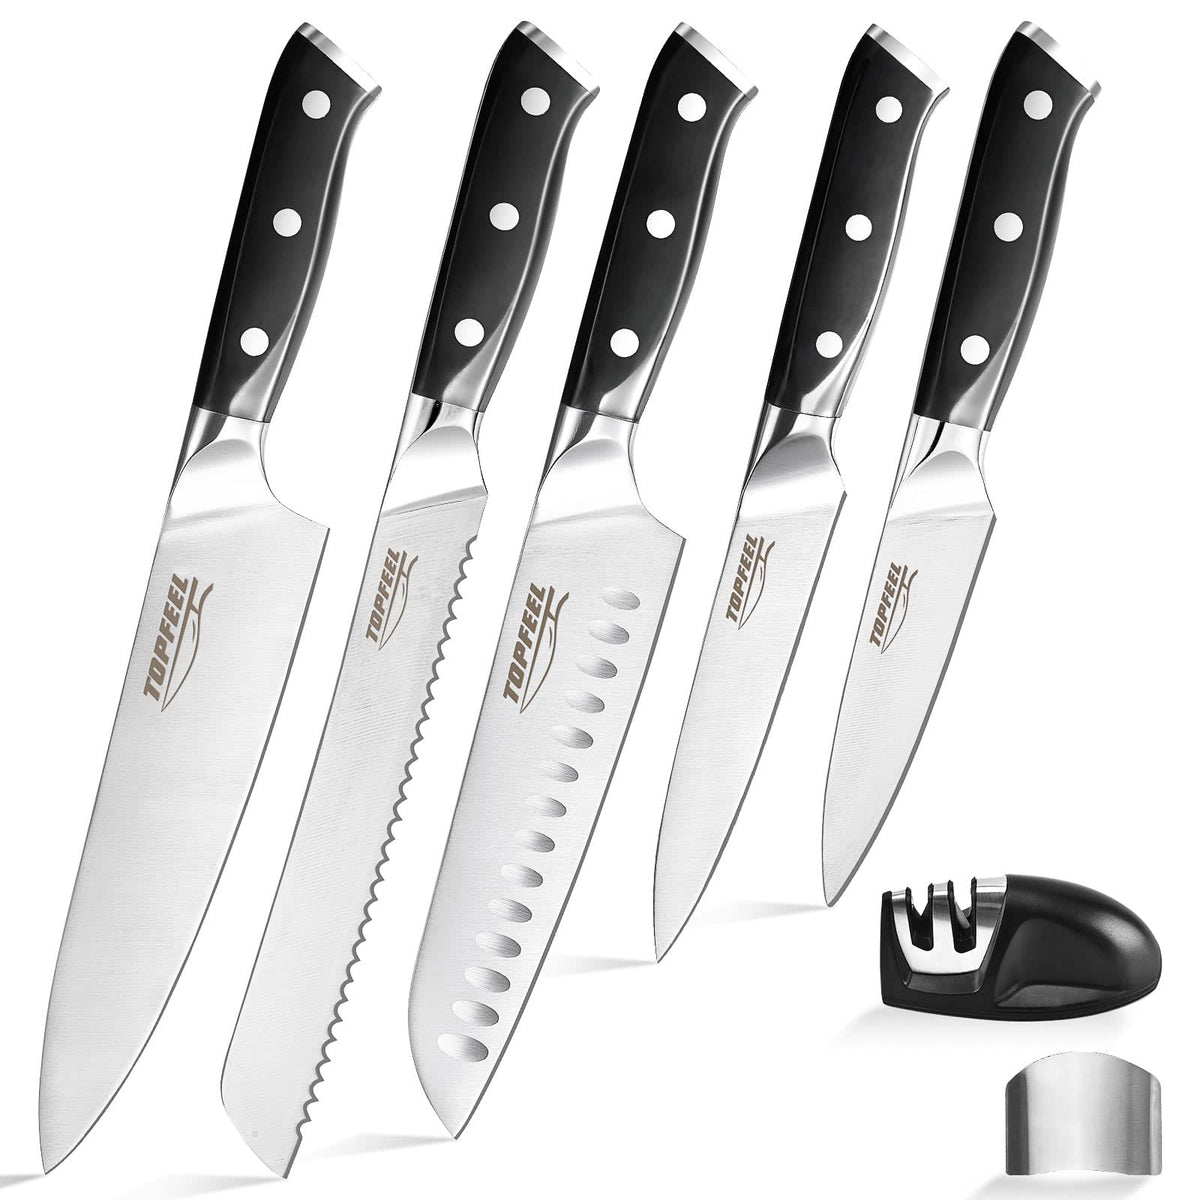 Topfeel 3pcs Butcher Knife Set Hand Forged Chef Knife Boning Knife, High Carbon Steel Meat Cutting Knife for Kitchen Camping BBQ